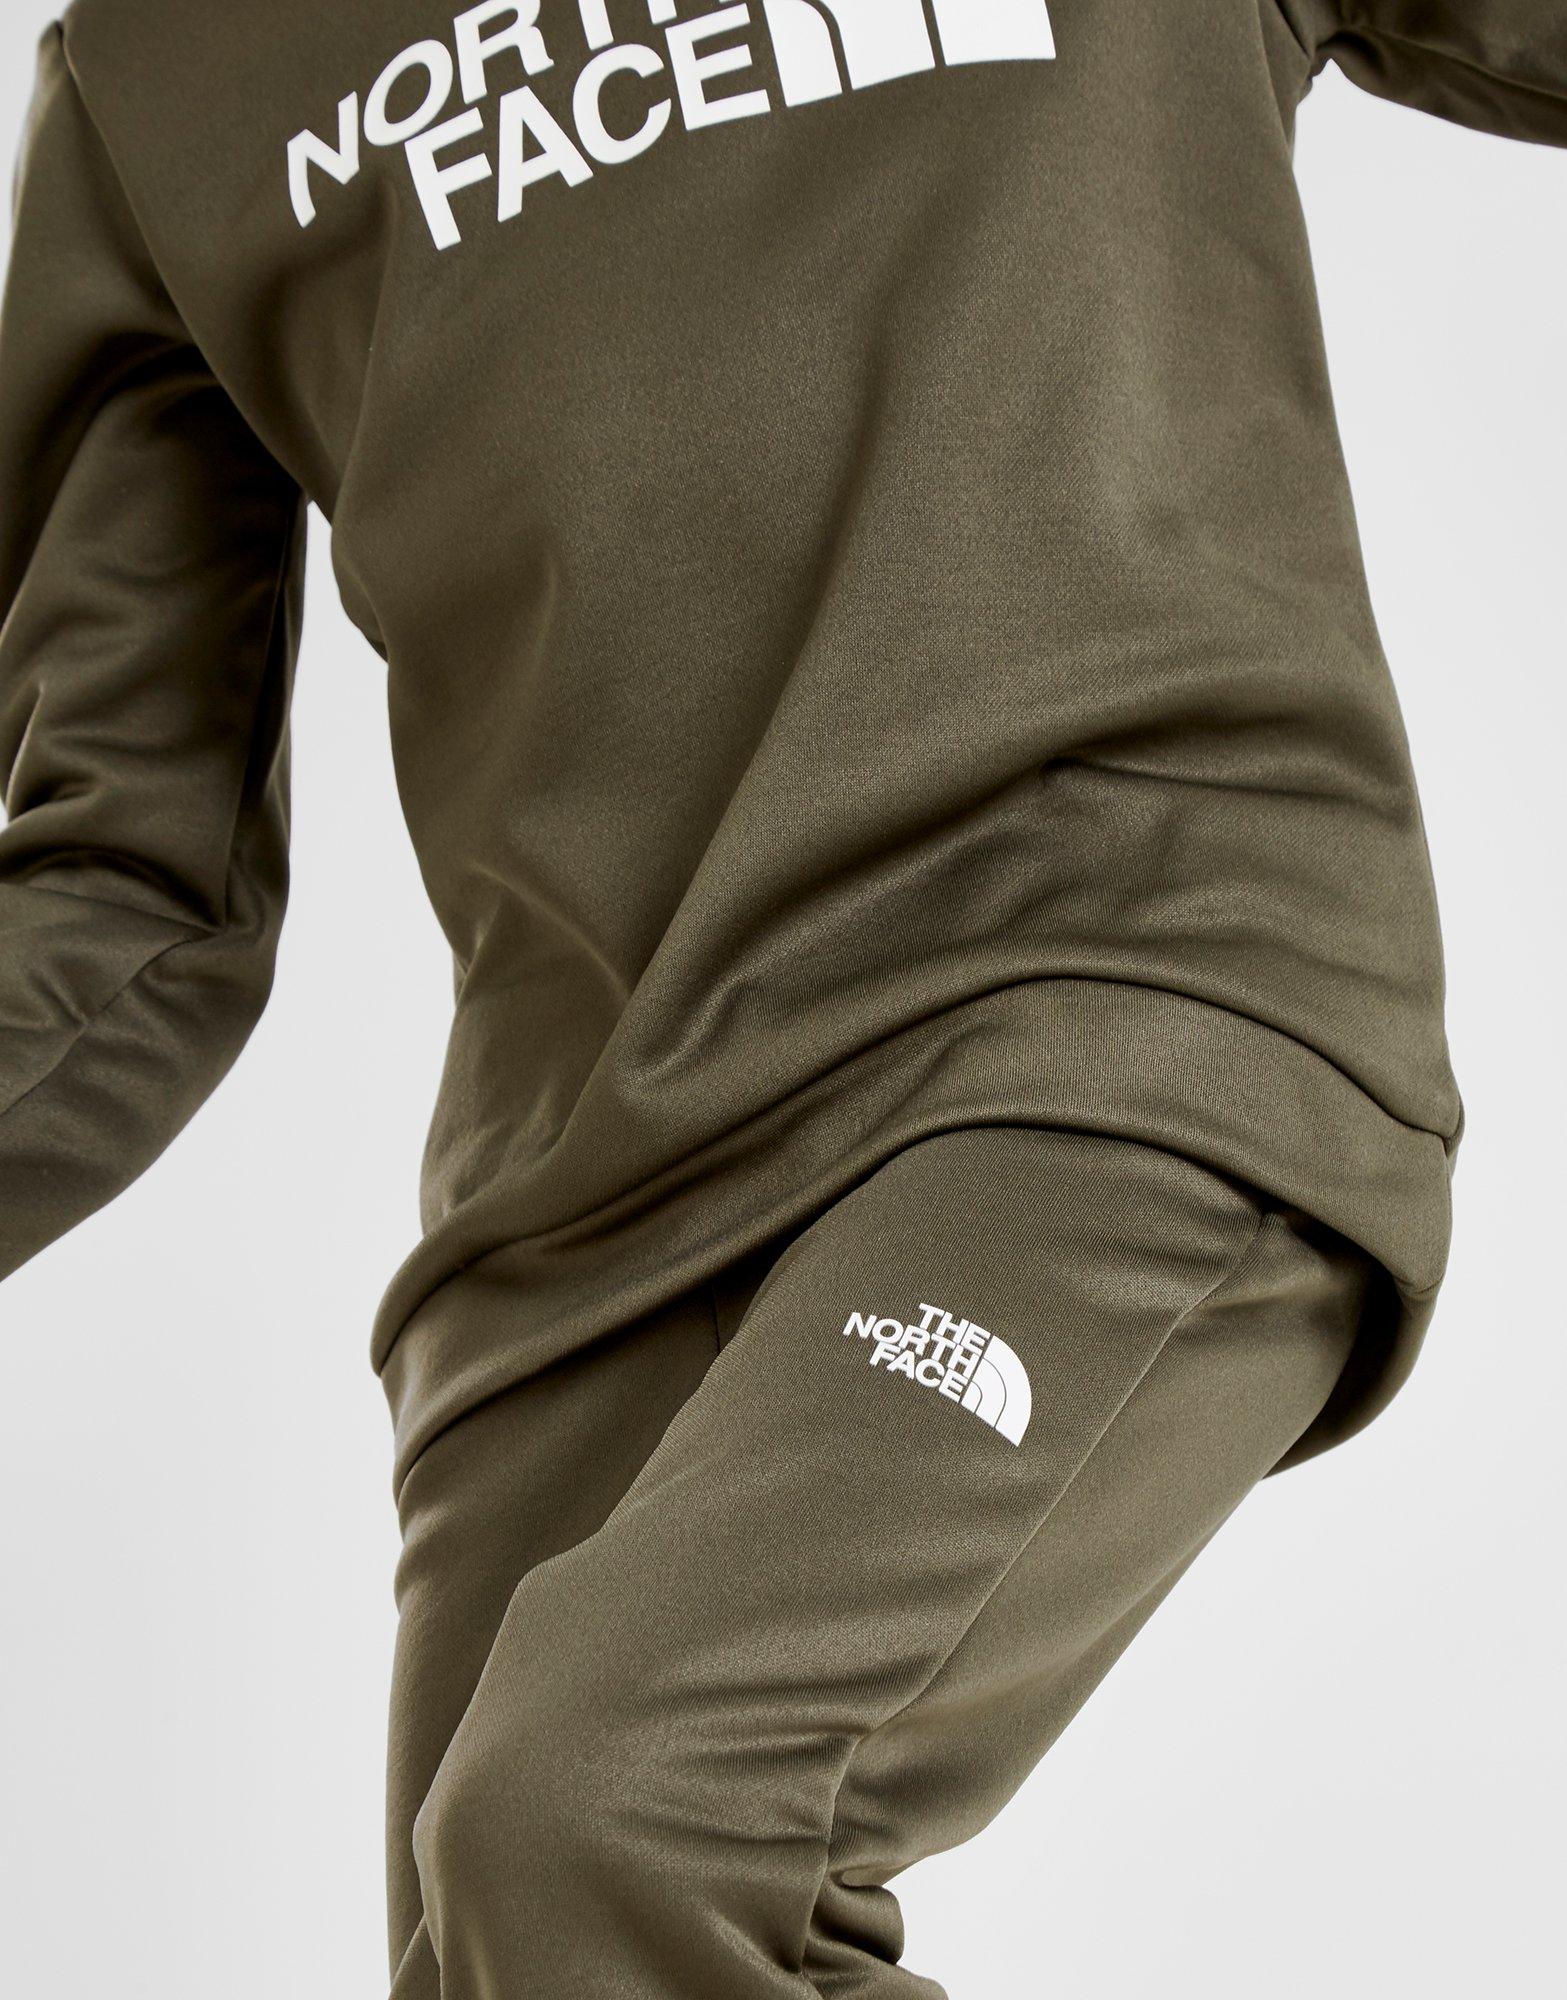 the north face boys tracksuit